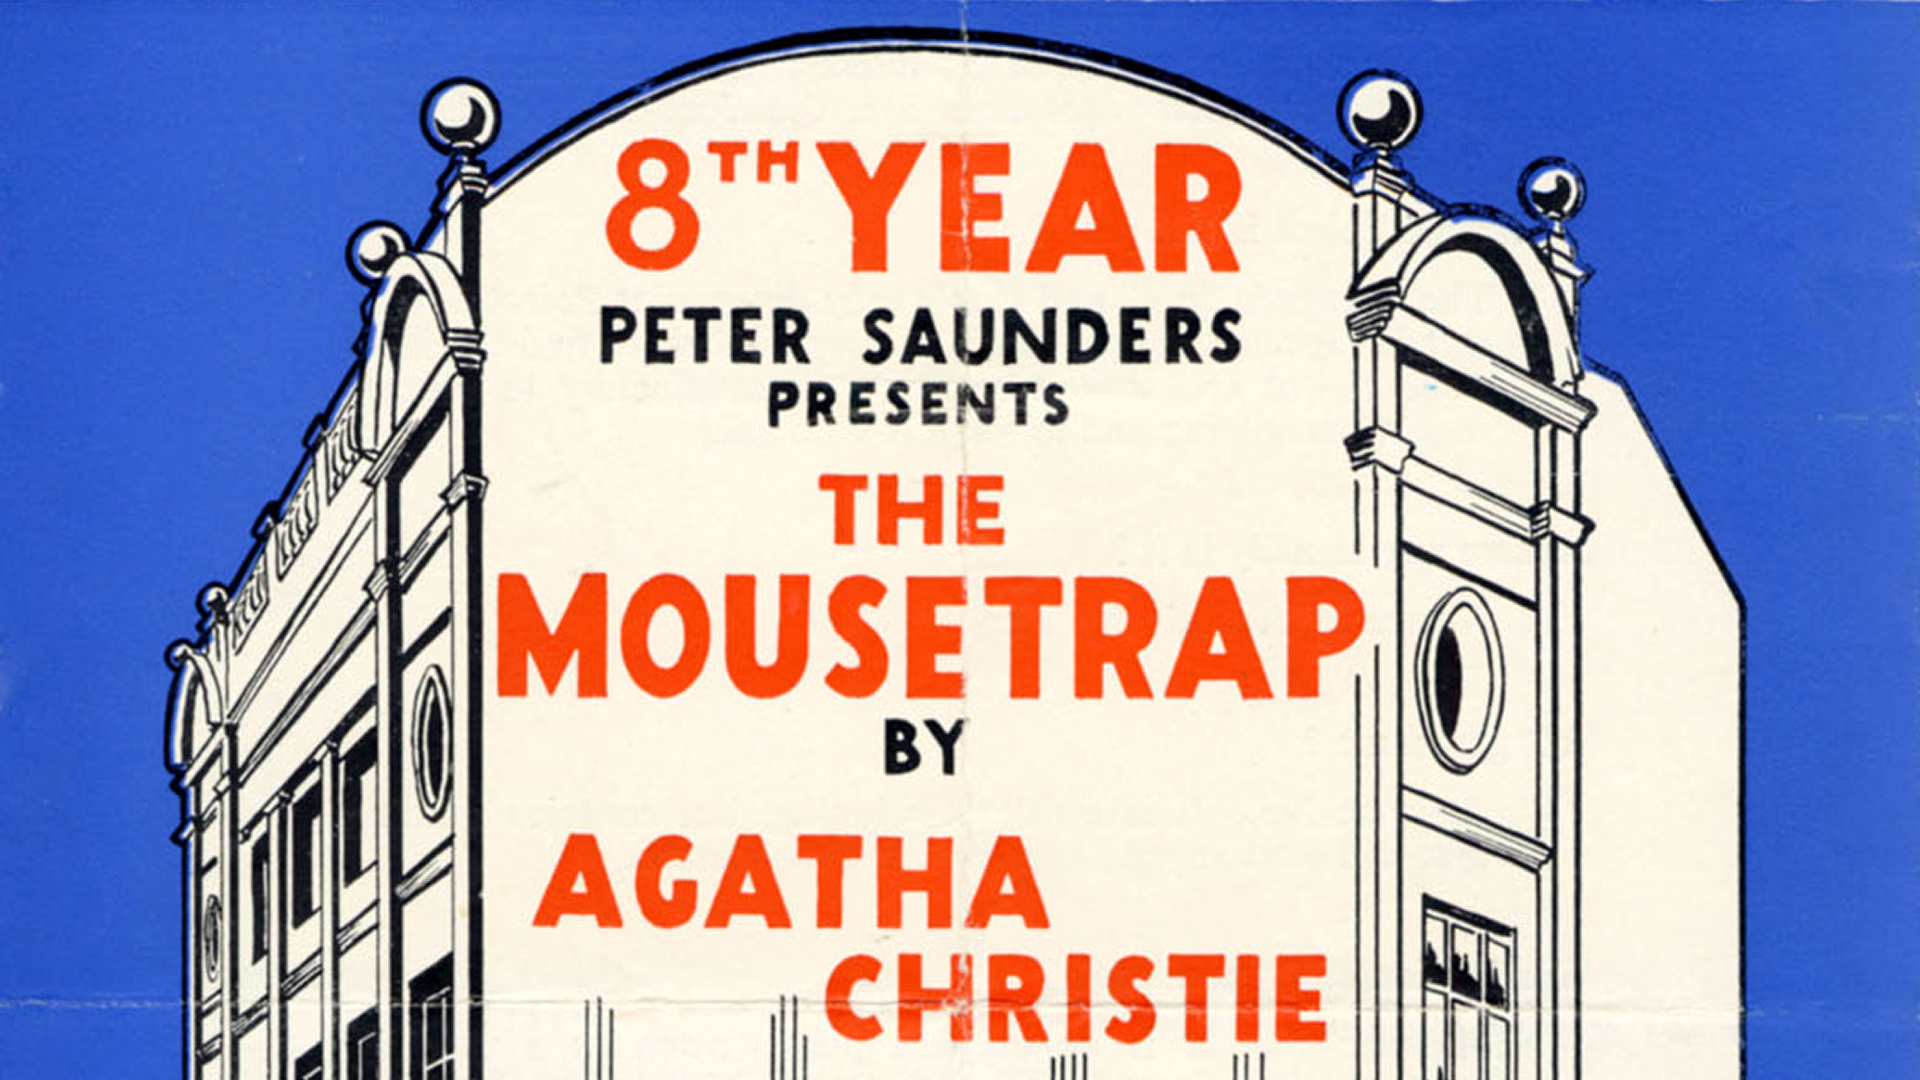 The Mousetrap opens in London